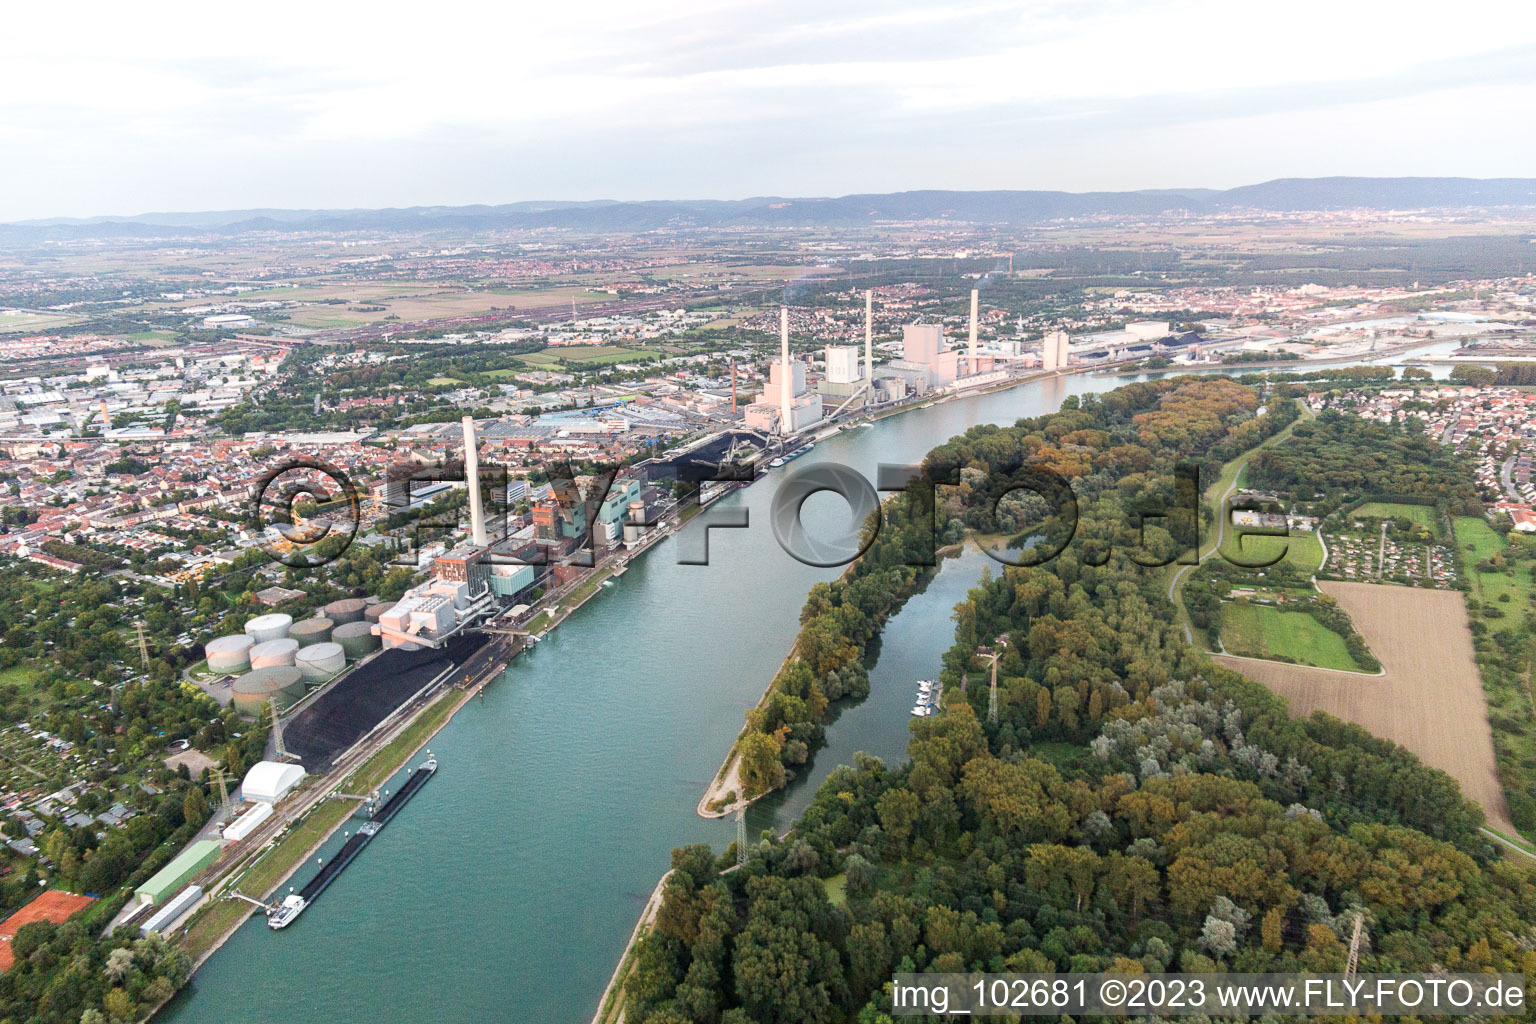 Altrip in the state Rhineland-Palatinate, Germany seen from a drone